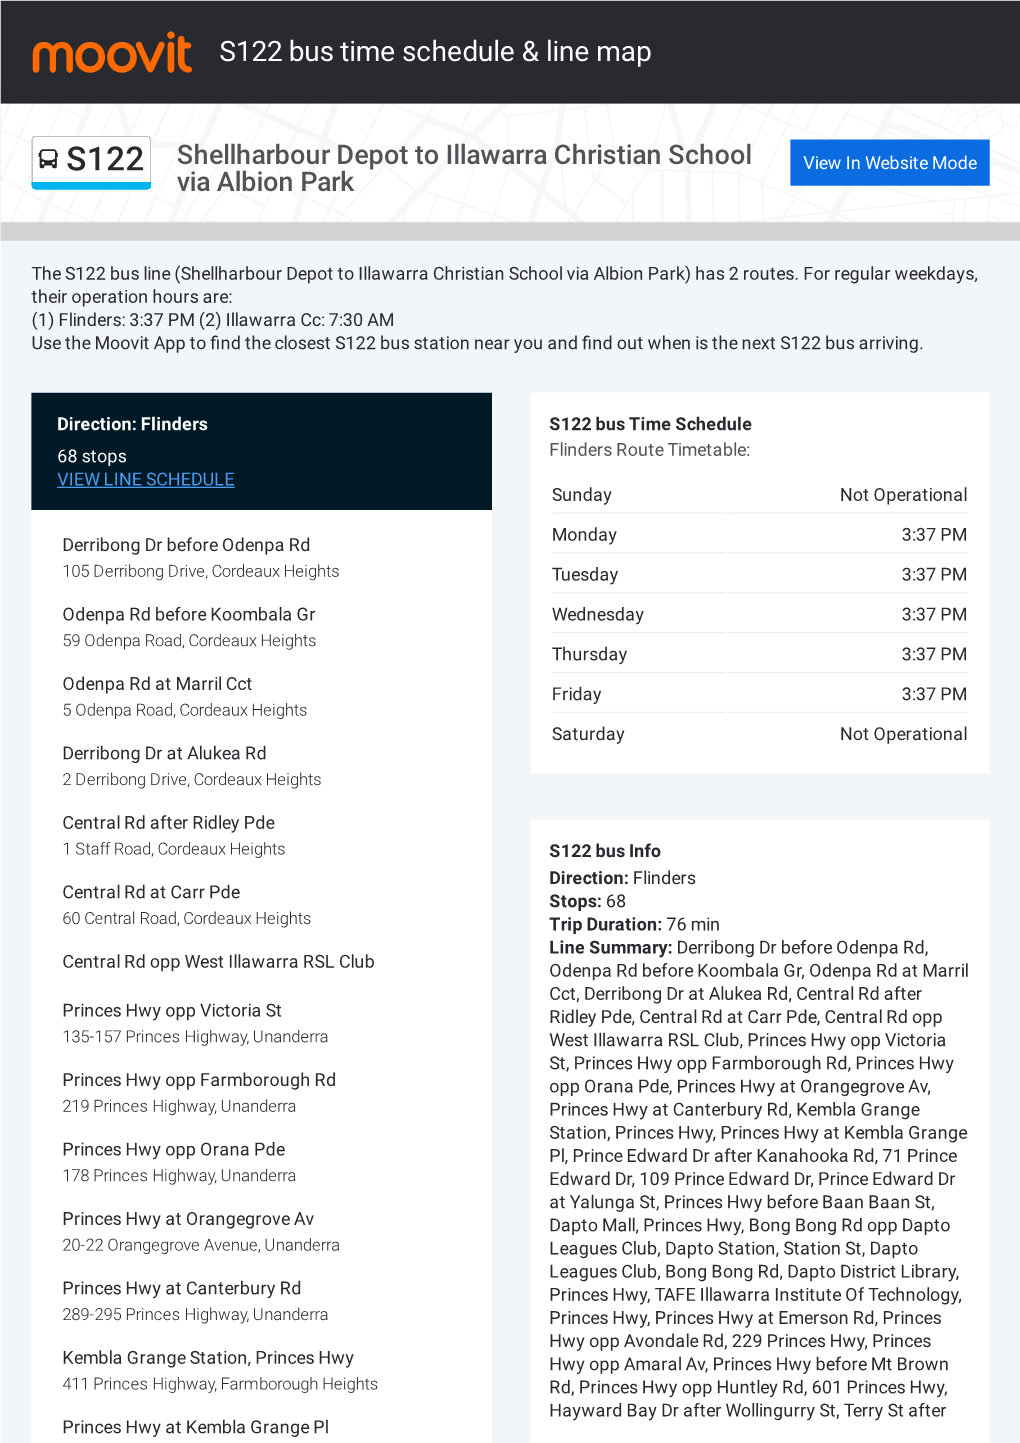 S122 Bus Time Schedule & Line Route